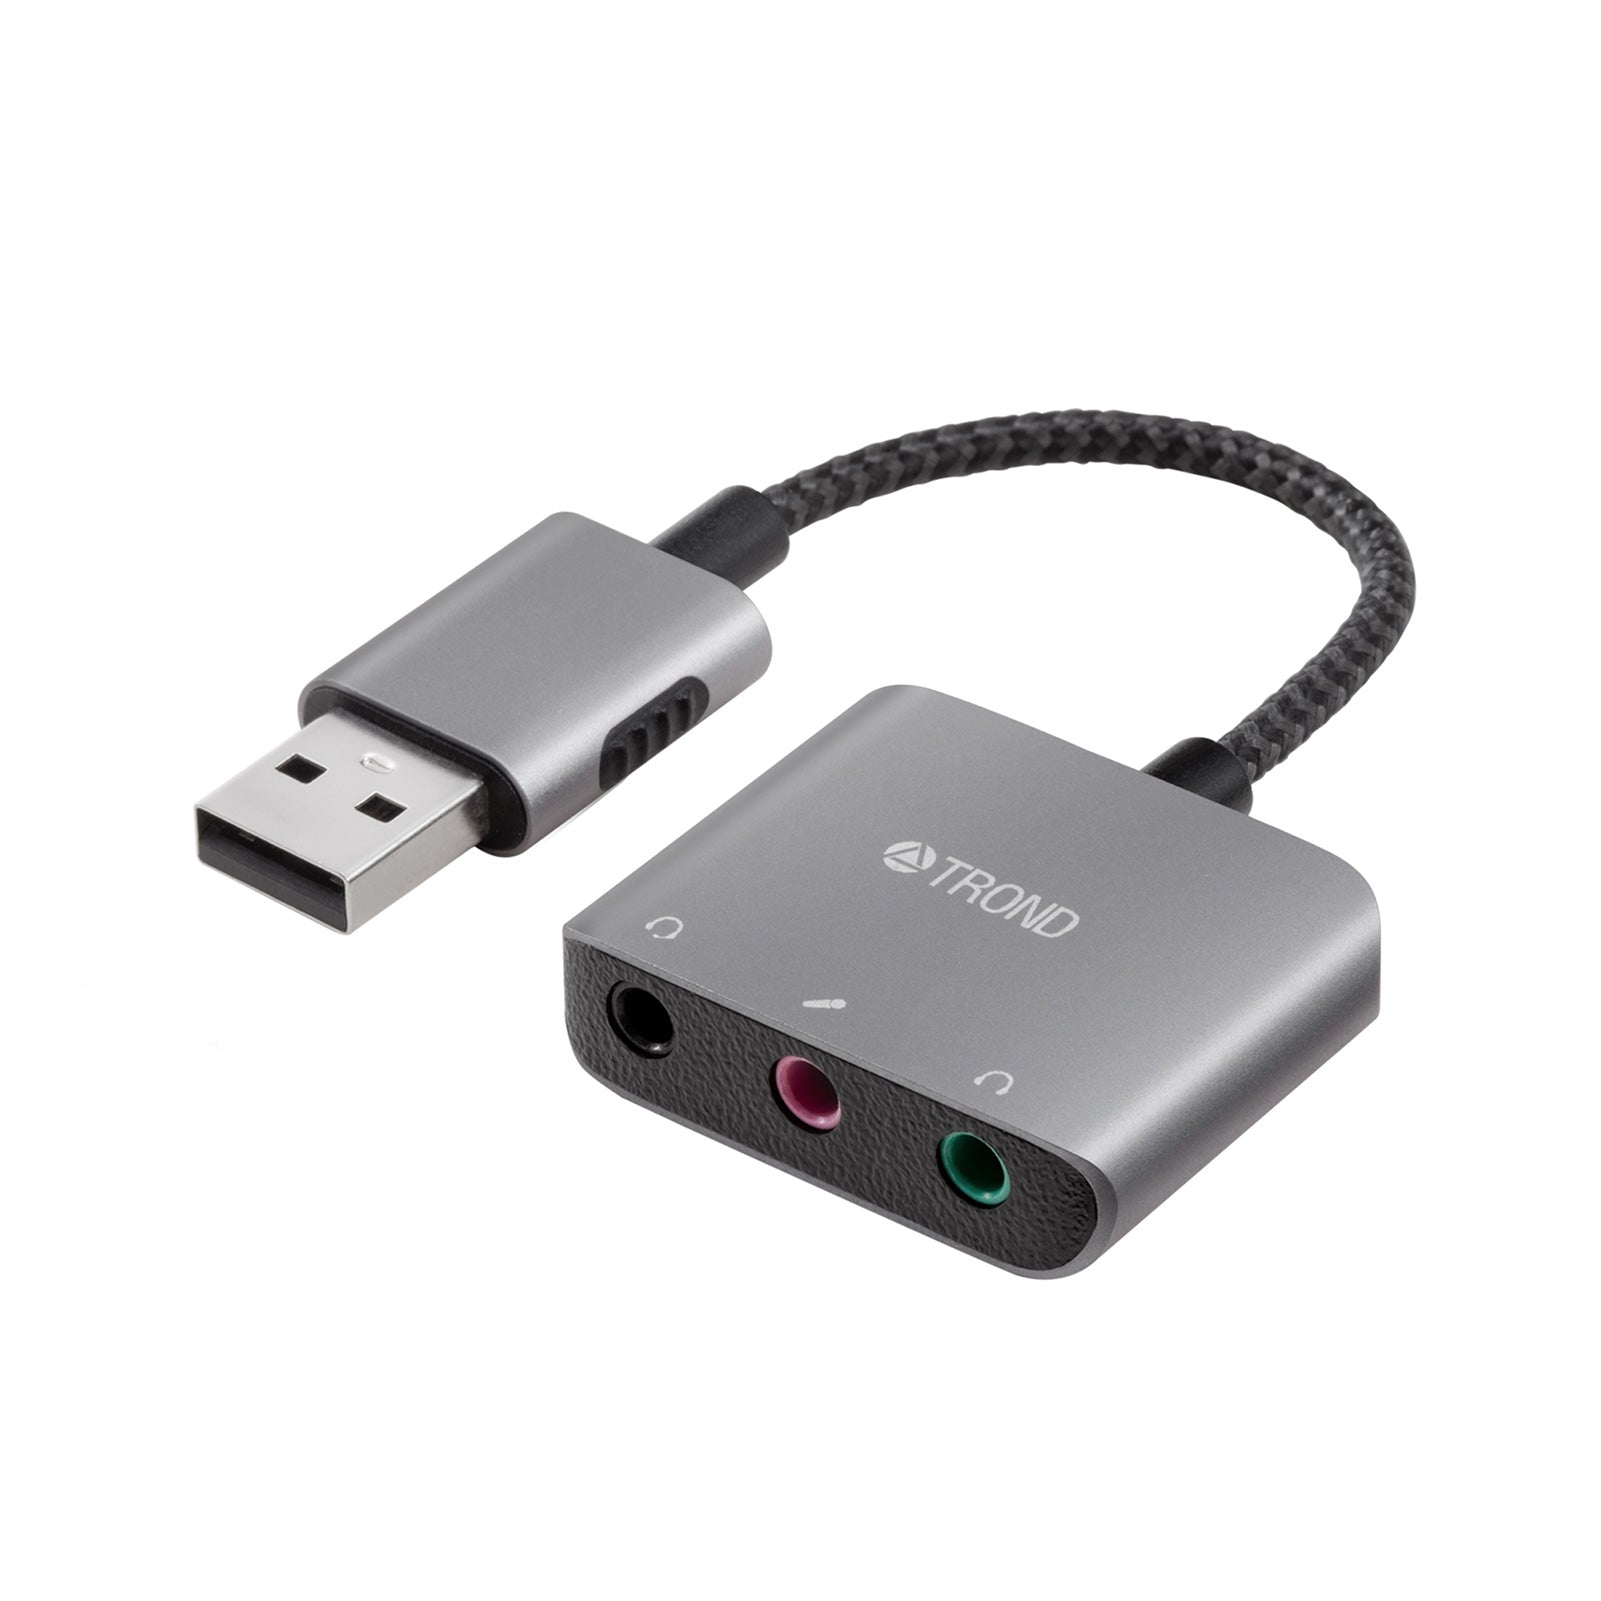 TROND External Sound Card USB Audio Adapter, Durable Aluminum Housing,  Flexible Nylon Braided Cable, USB Type A to 3.5mm TRS & TRRS Aux Jacks,  Space Gray